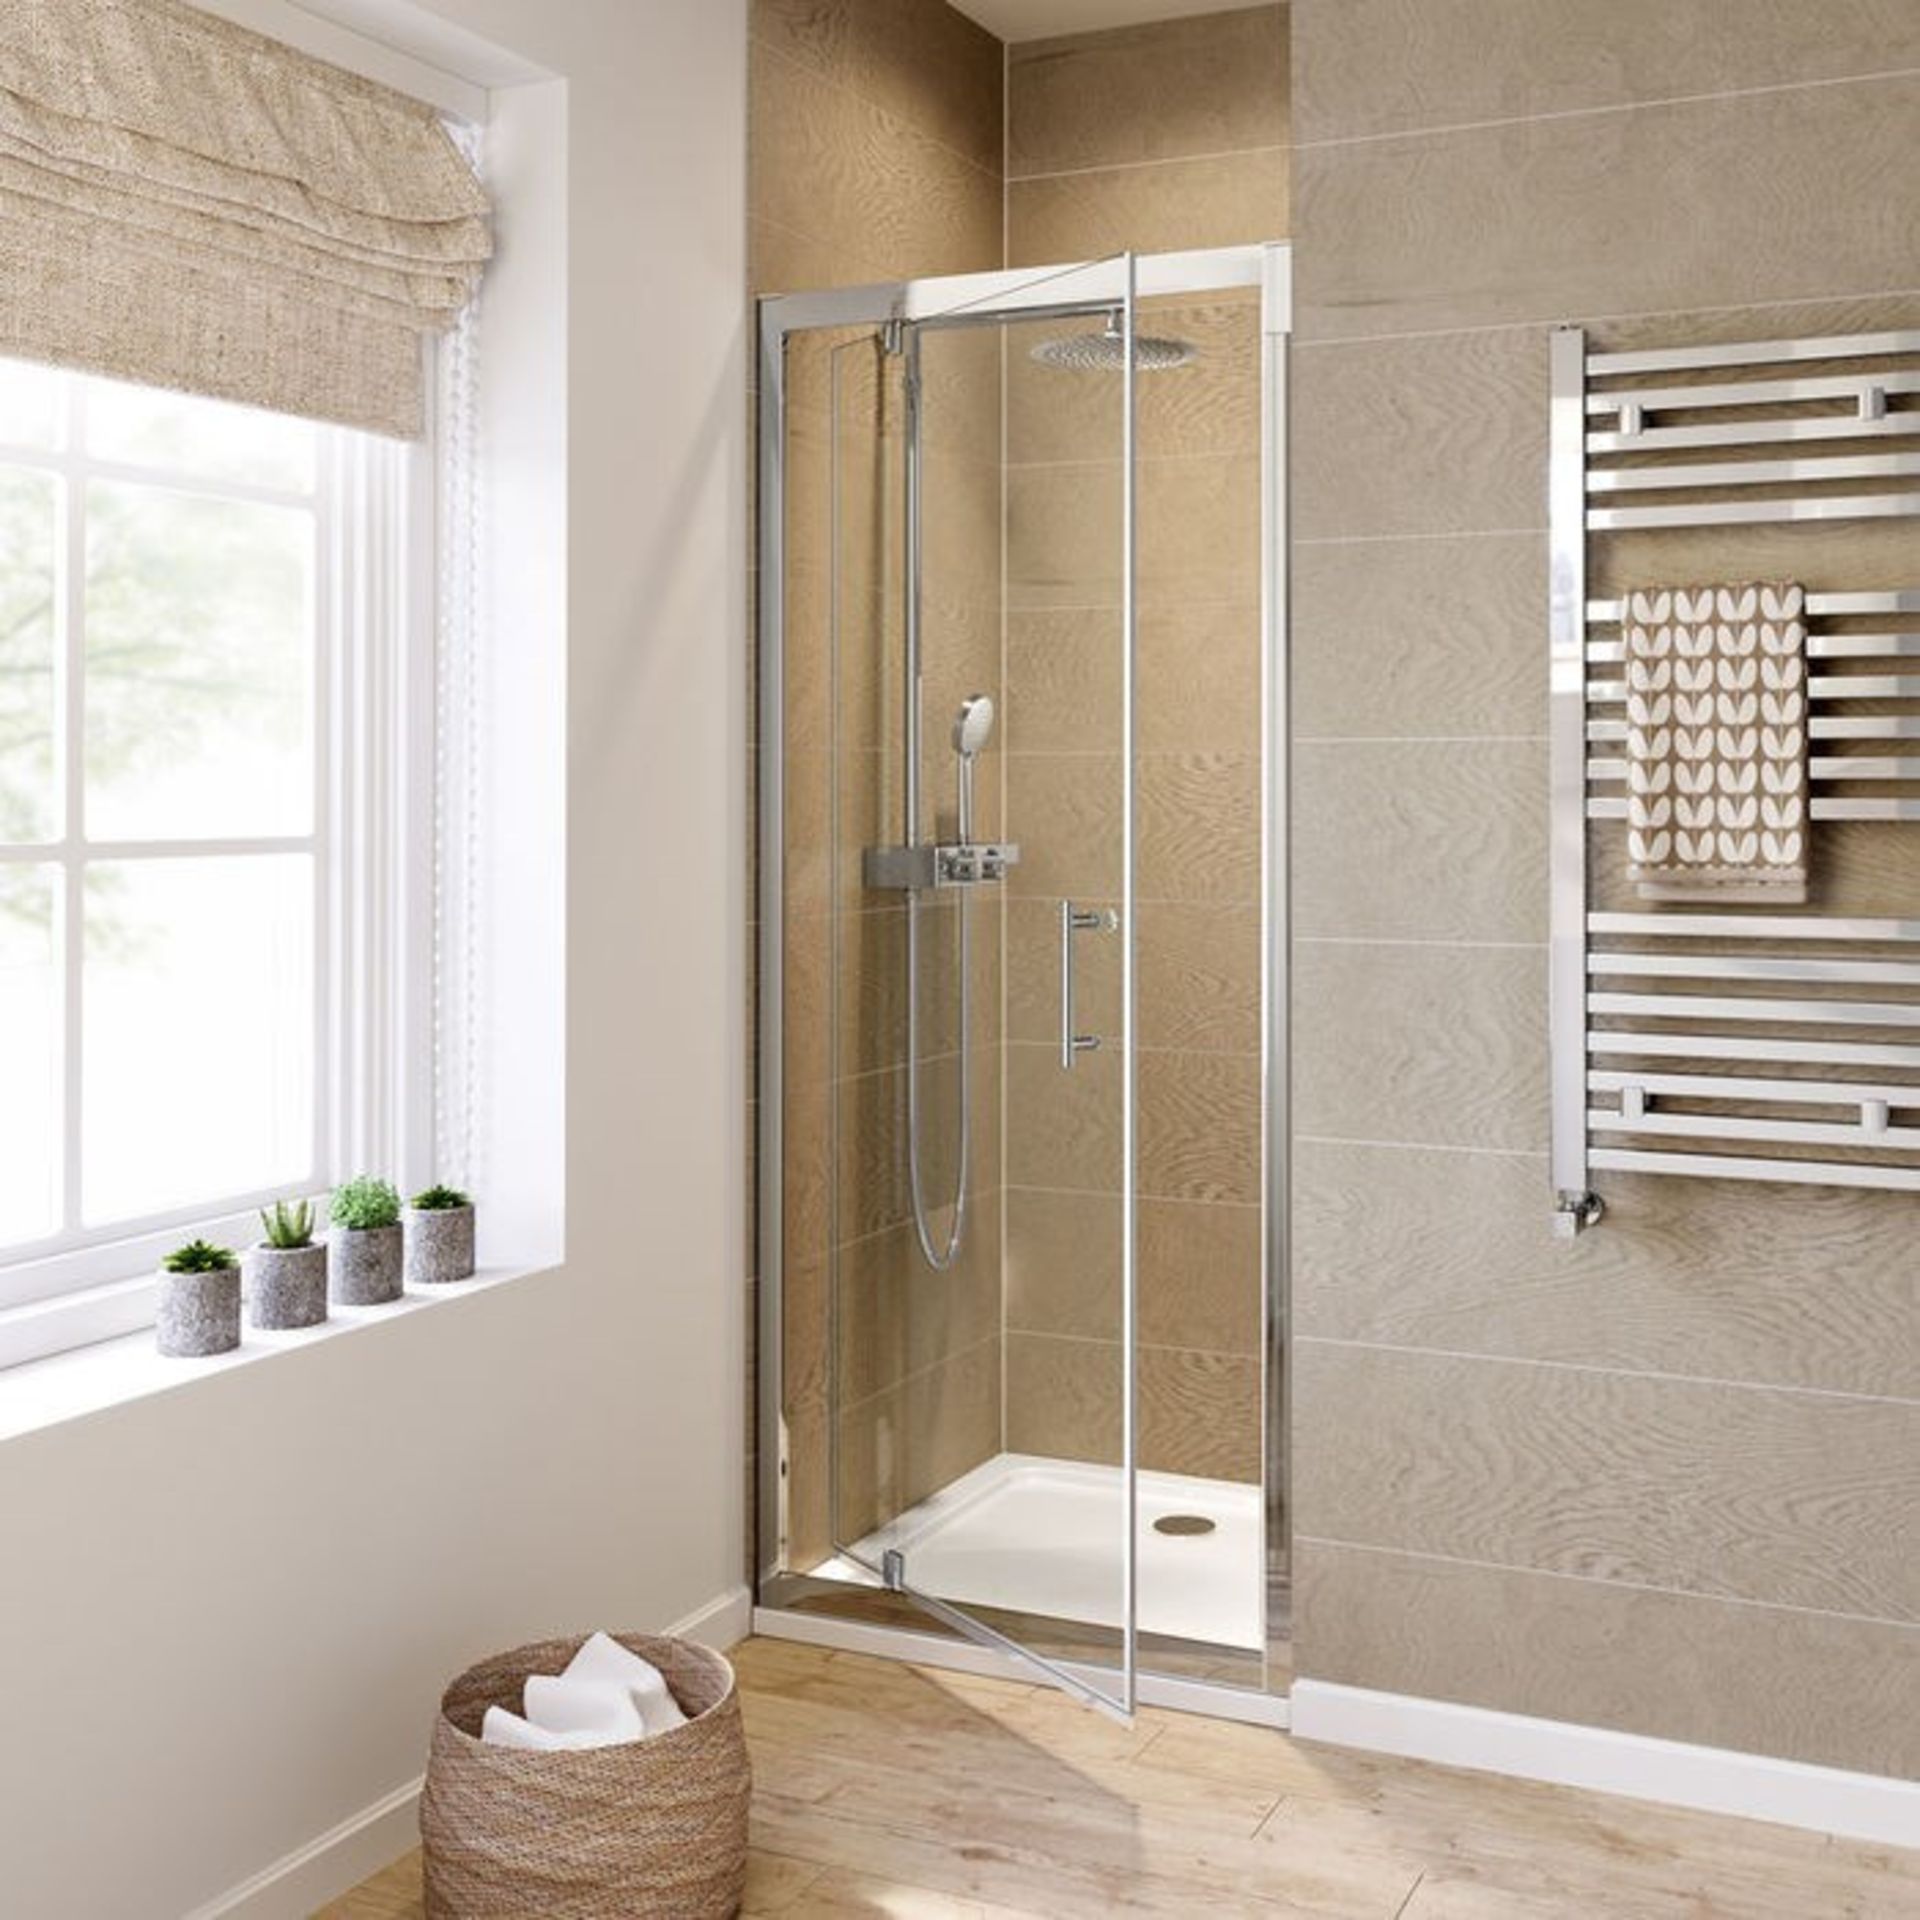 Twyfords 800mm - 6mm - Premium Pivot Shower Door. RRP £339.99.8mm Safety Glass Fully wat... - Image 3 of 3